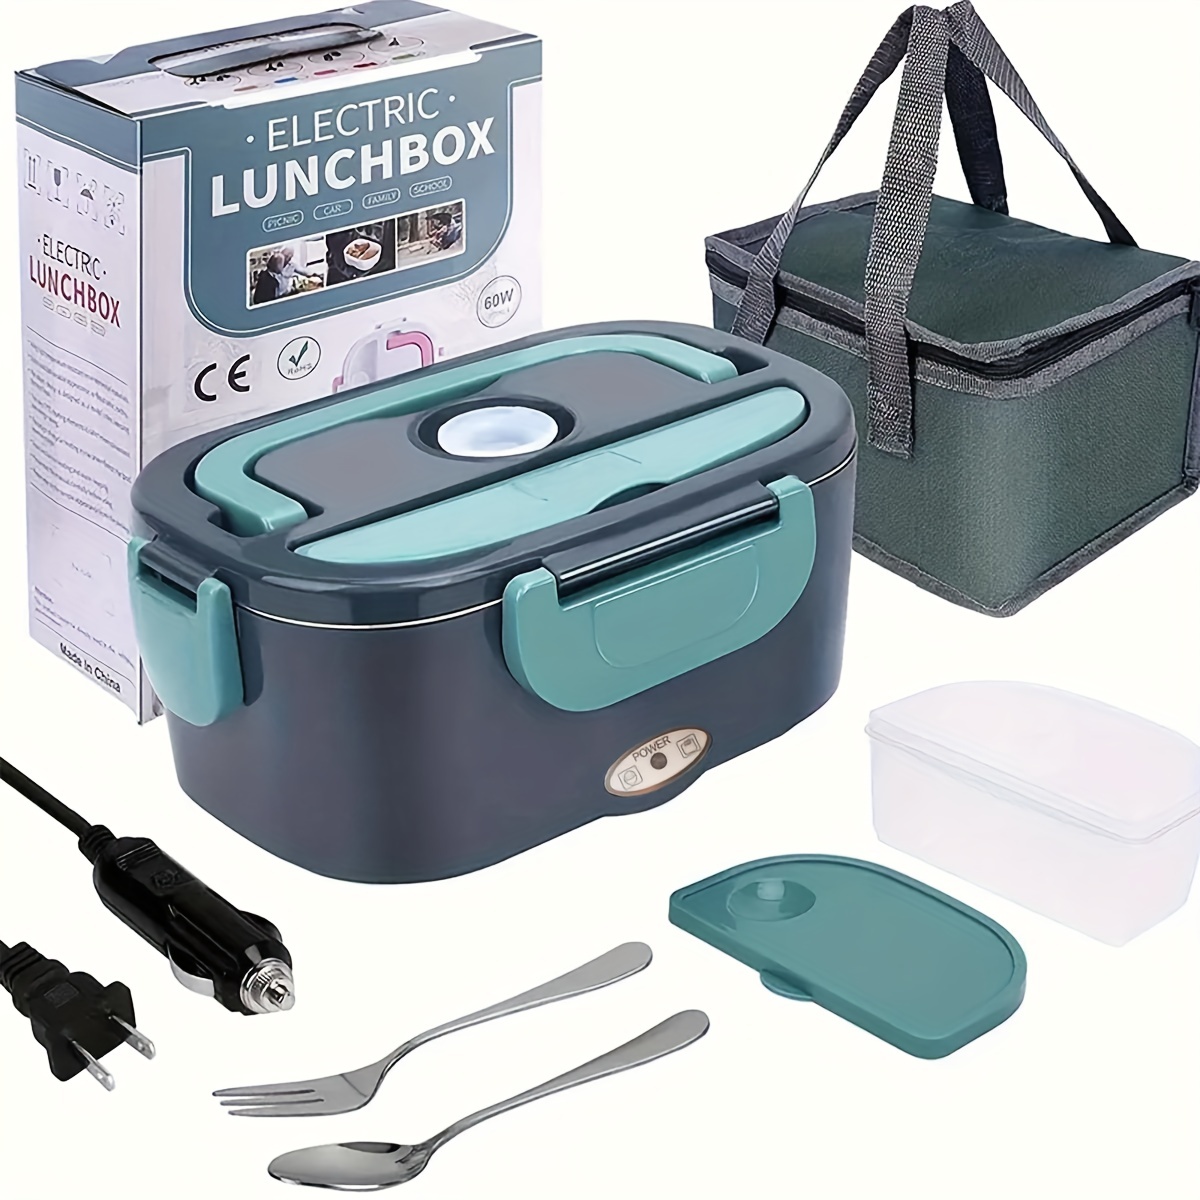 Multifunctional electric lunch box, household plug in bento box